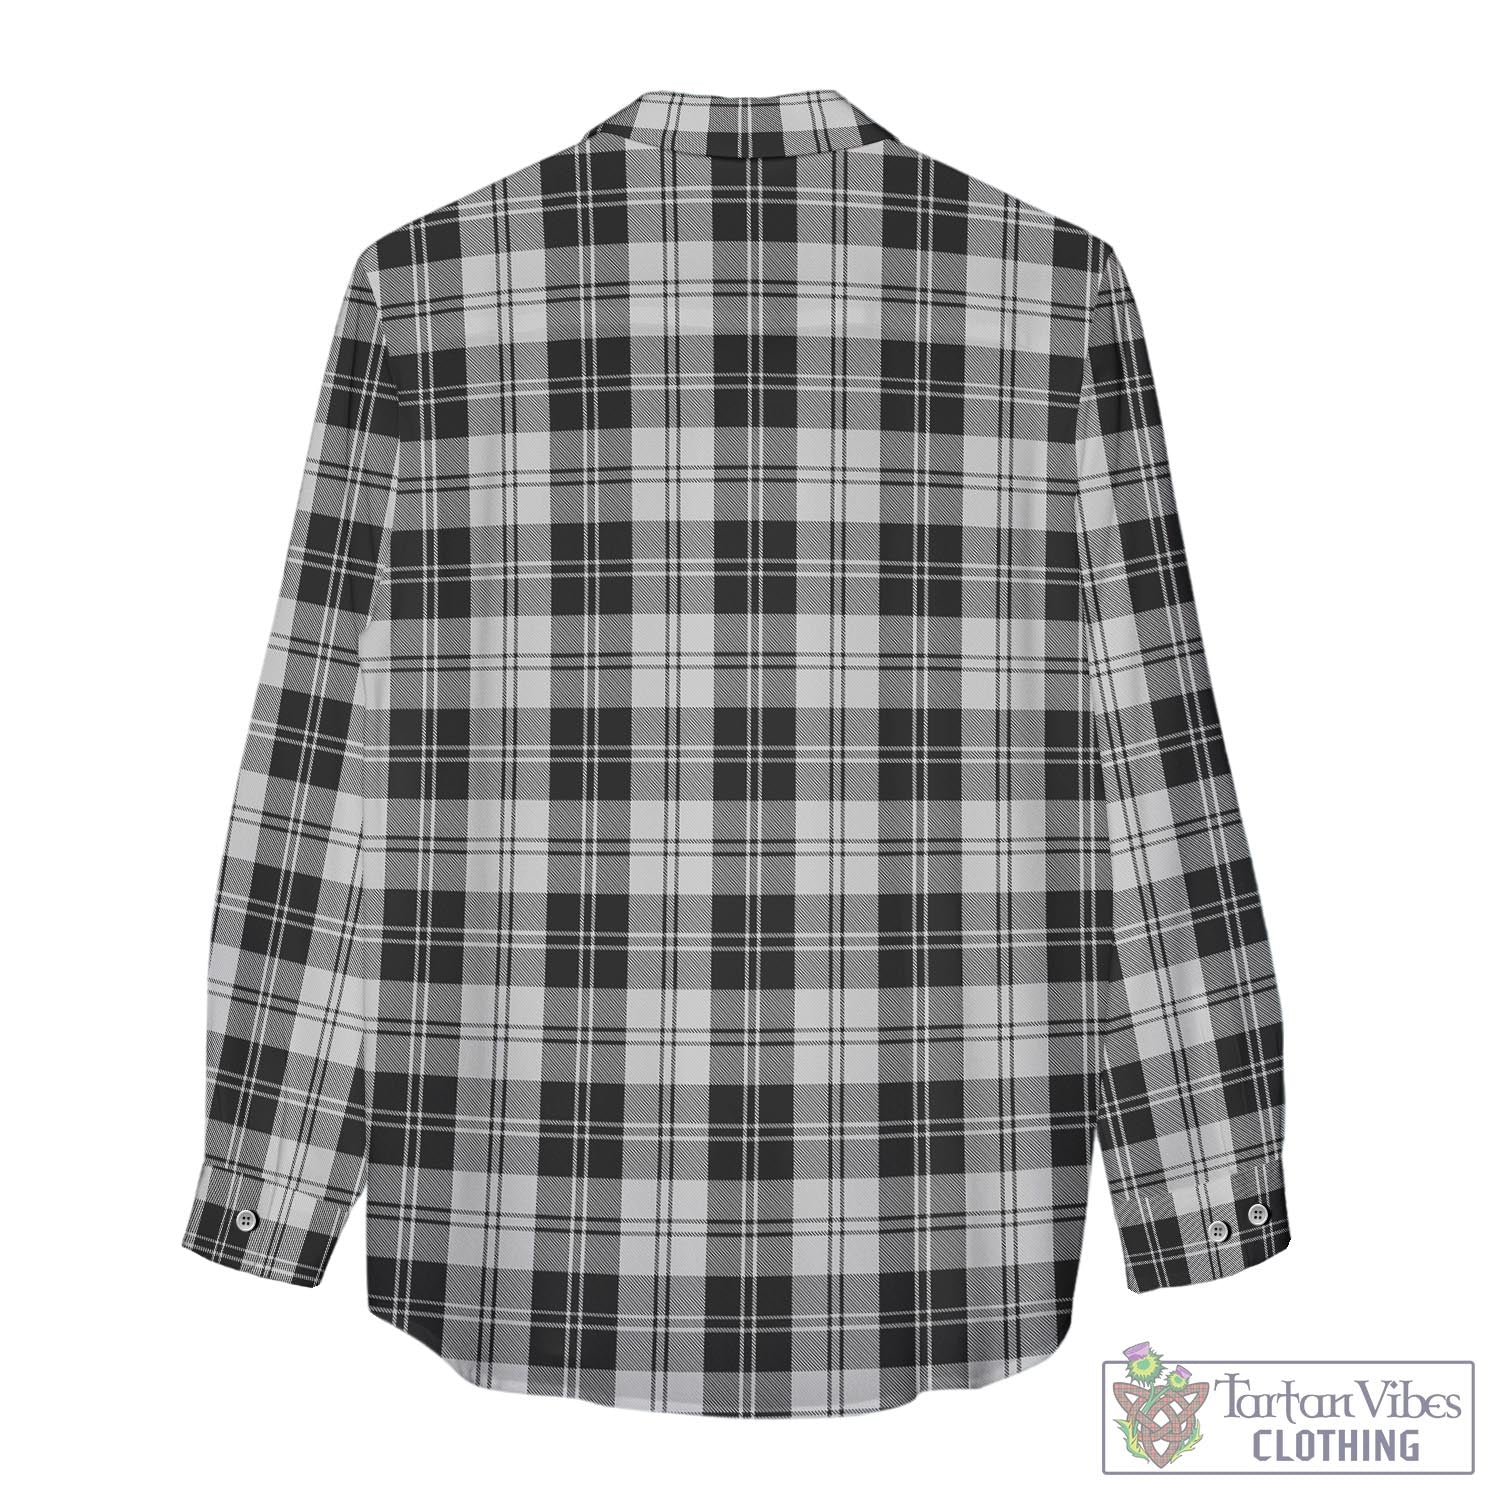 Tartan Vibes Clothing Erskine Black and White Tartan Womens Casual Shirt with Family Crest